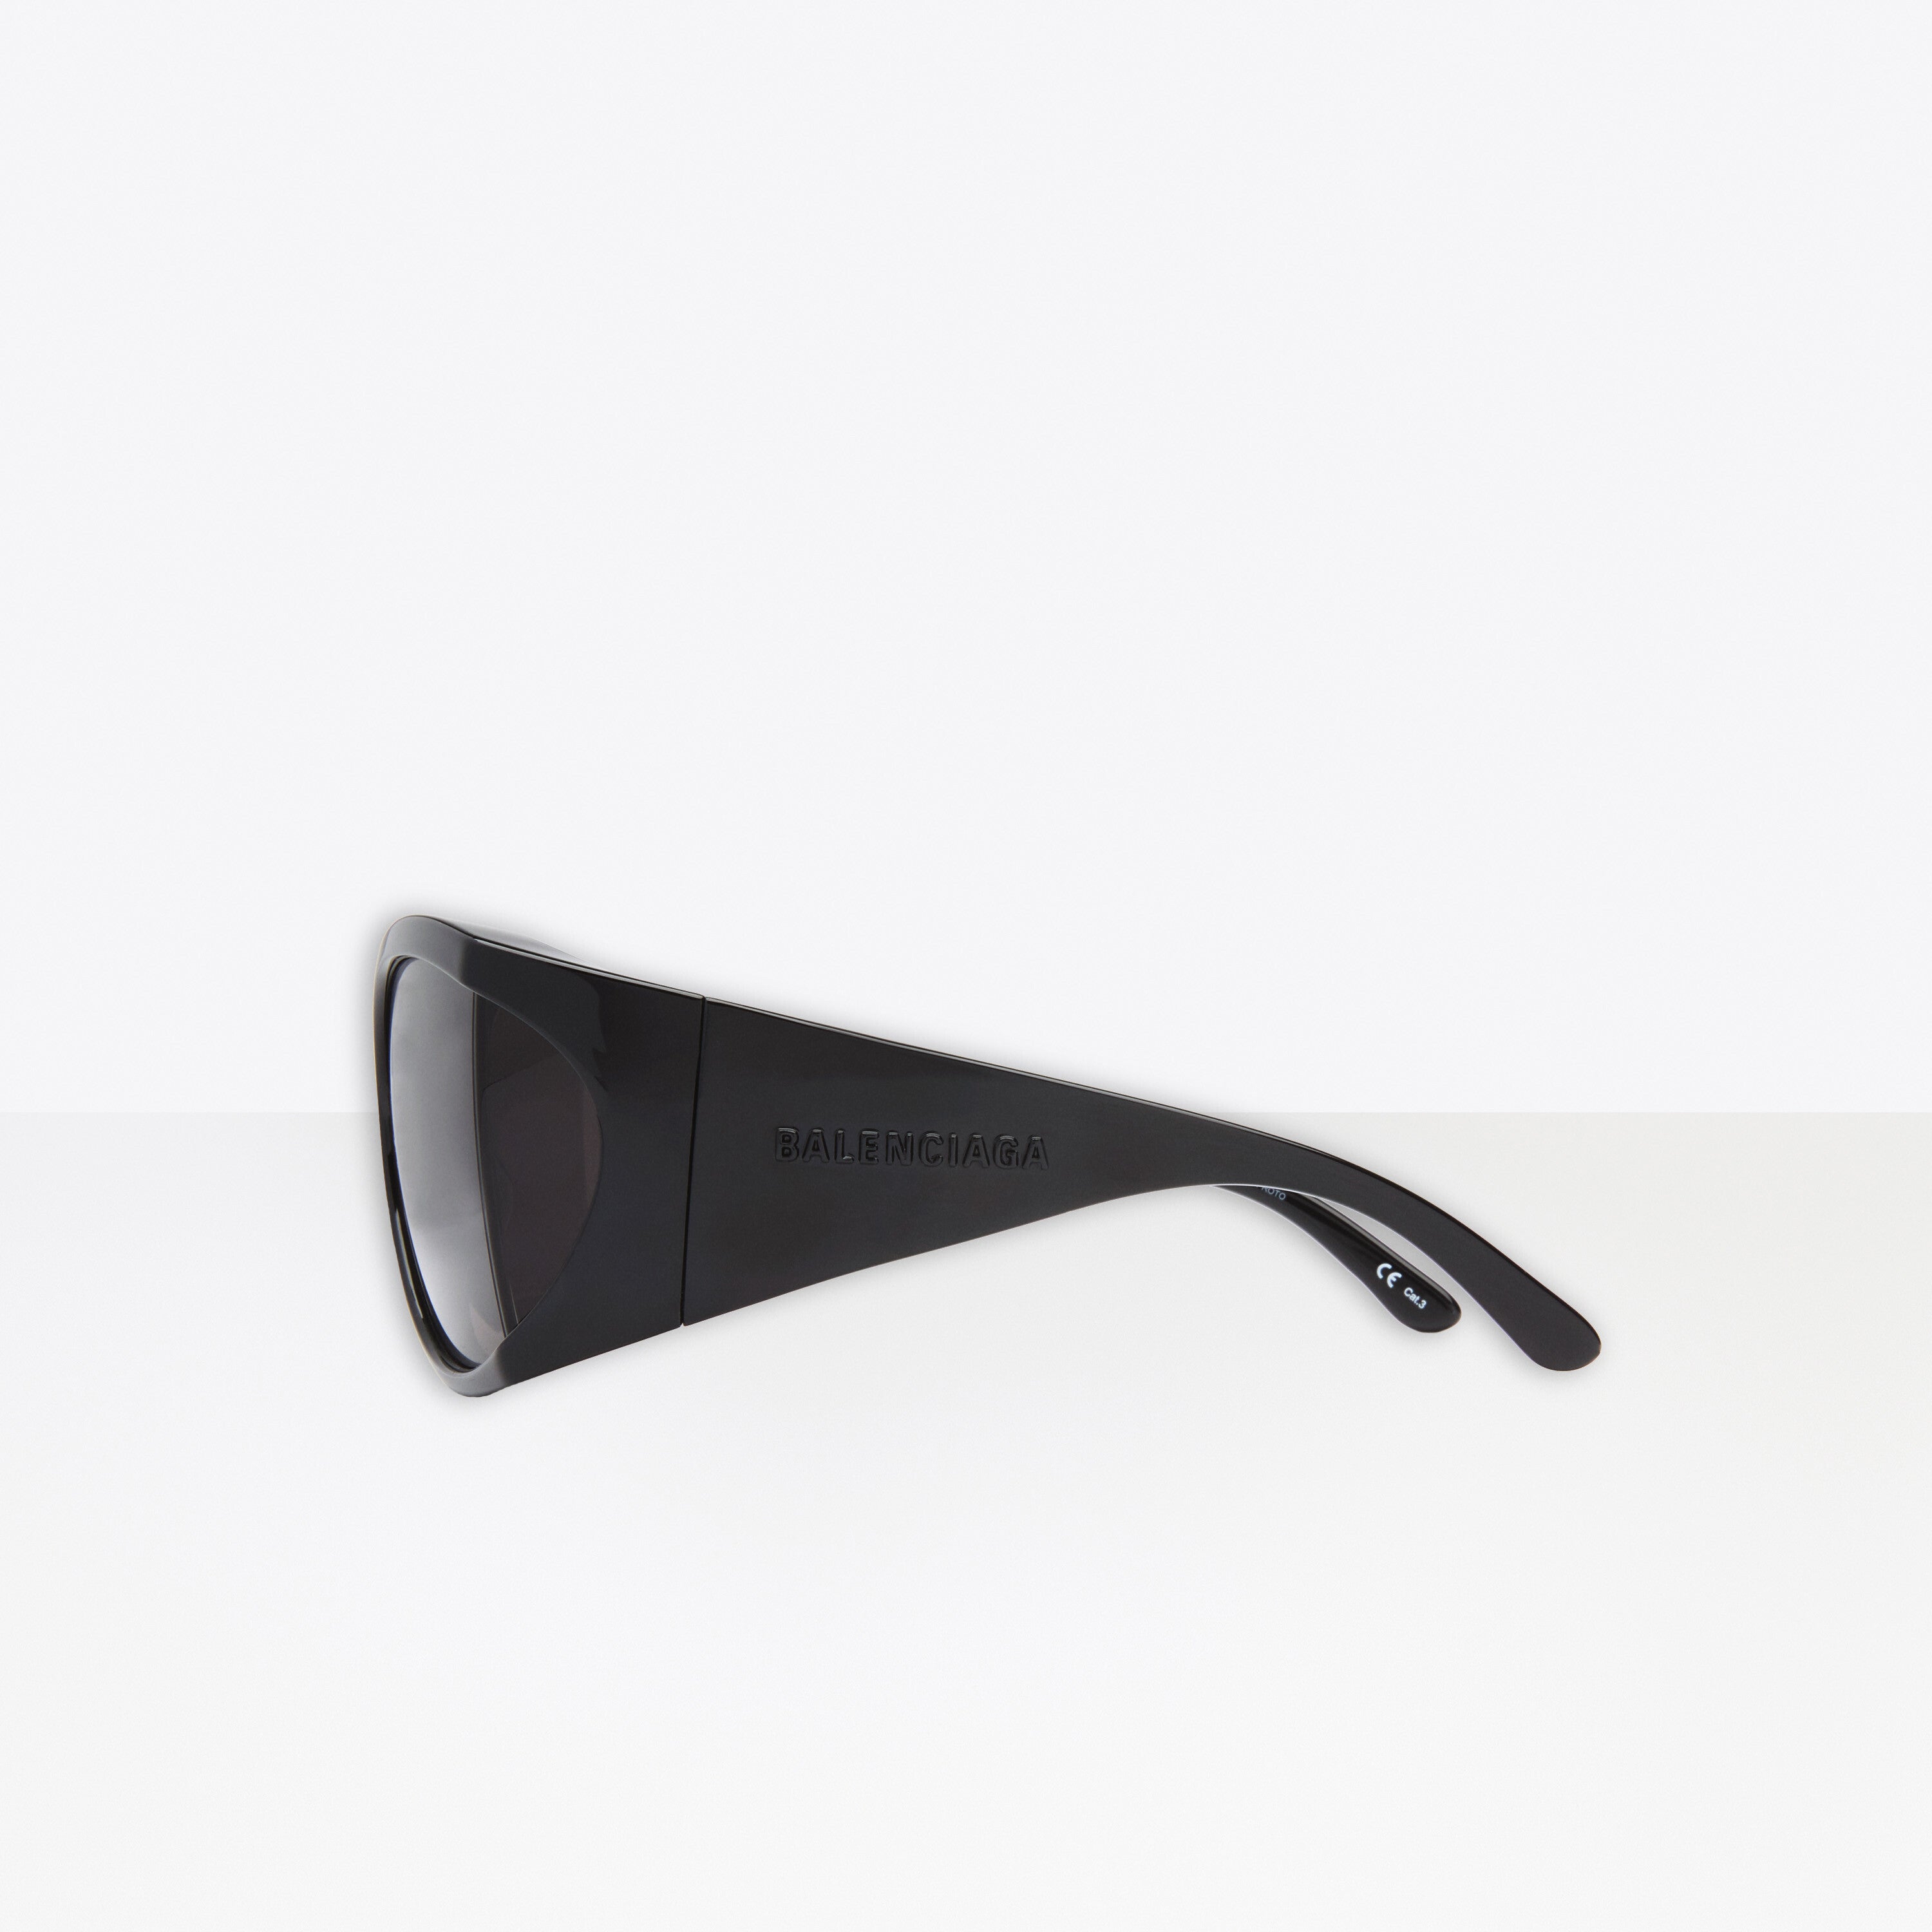 Void butterfly sunglasses with logo